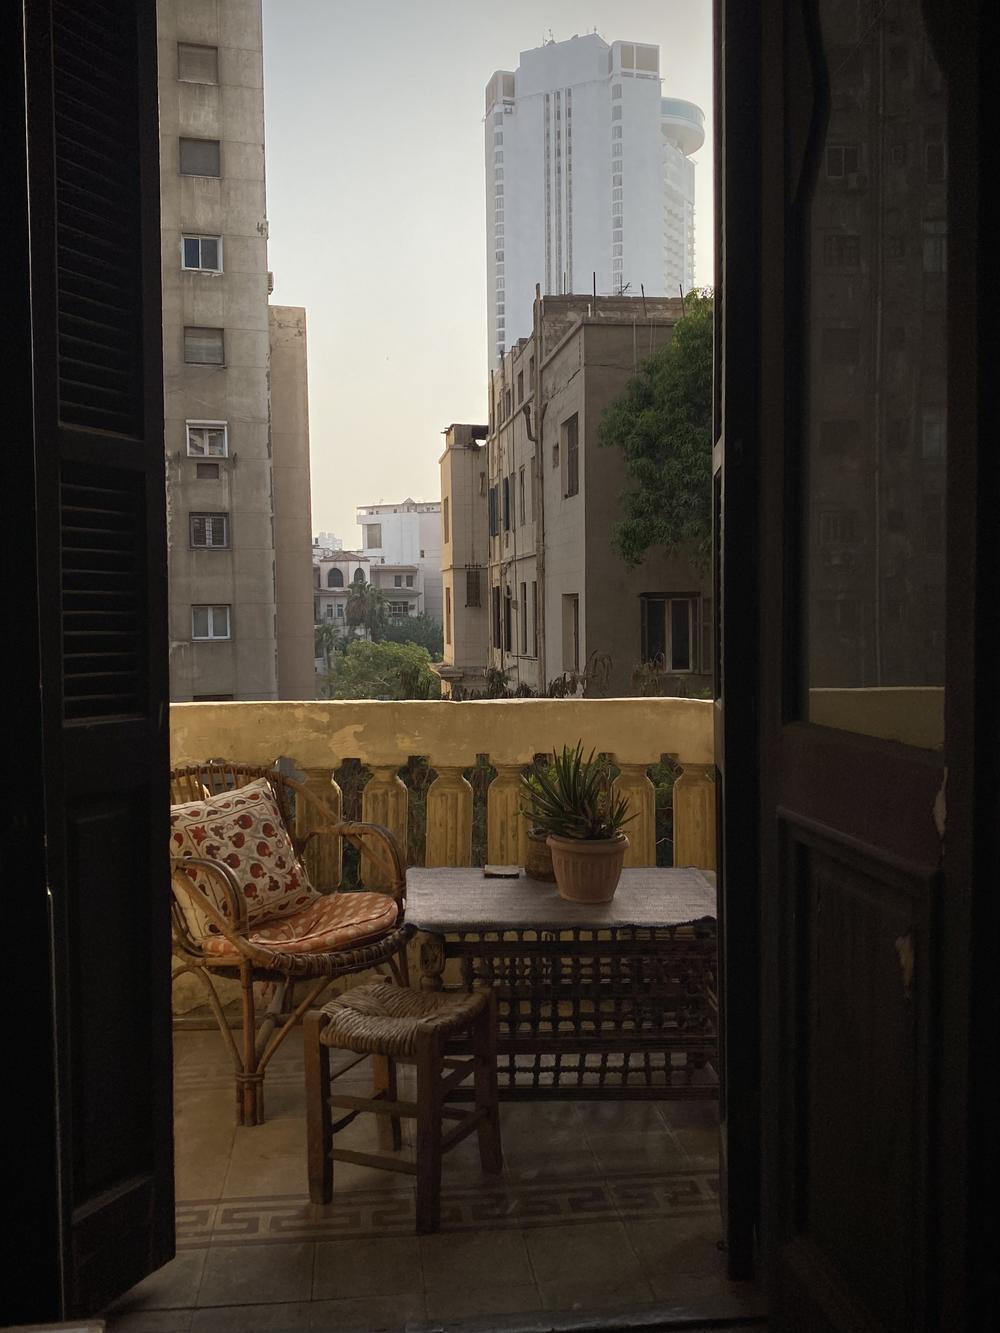 El Massry took this photo on a visit to a beloved friend's studio in Cairo just before sunset on an autumn day in 2021. 